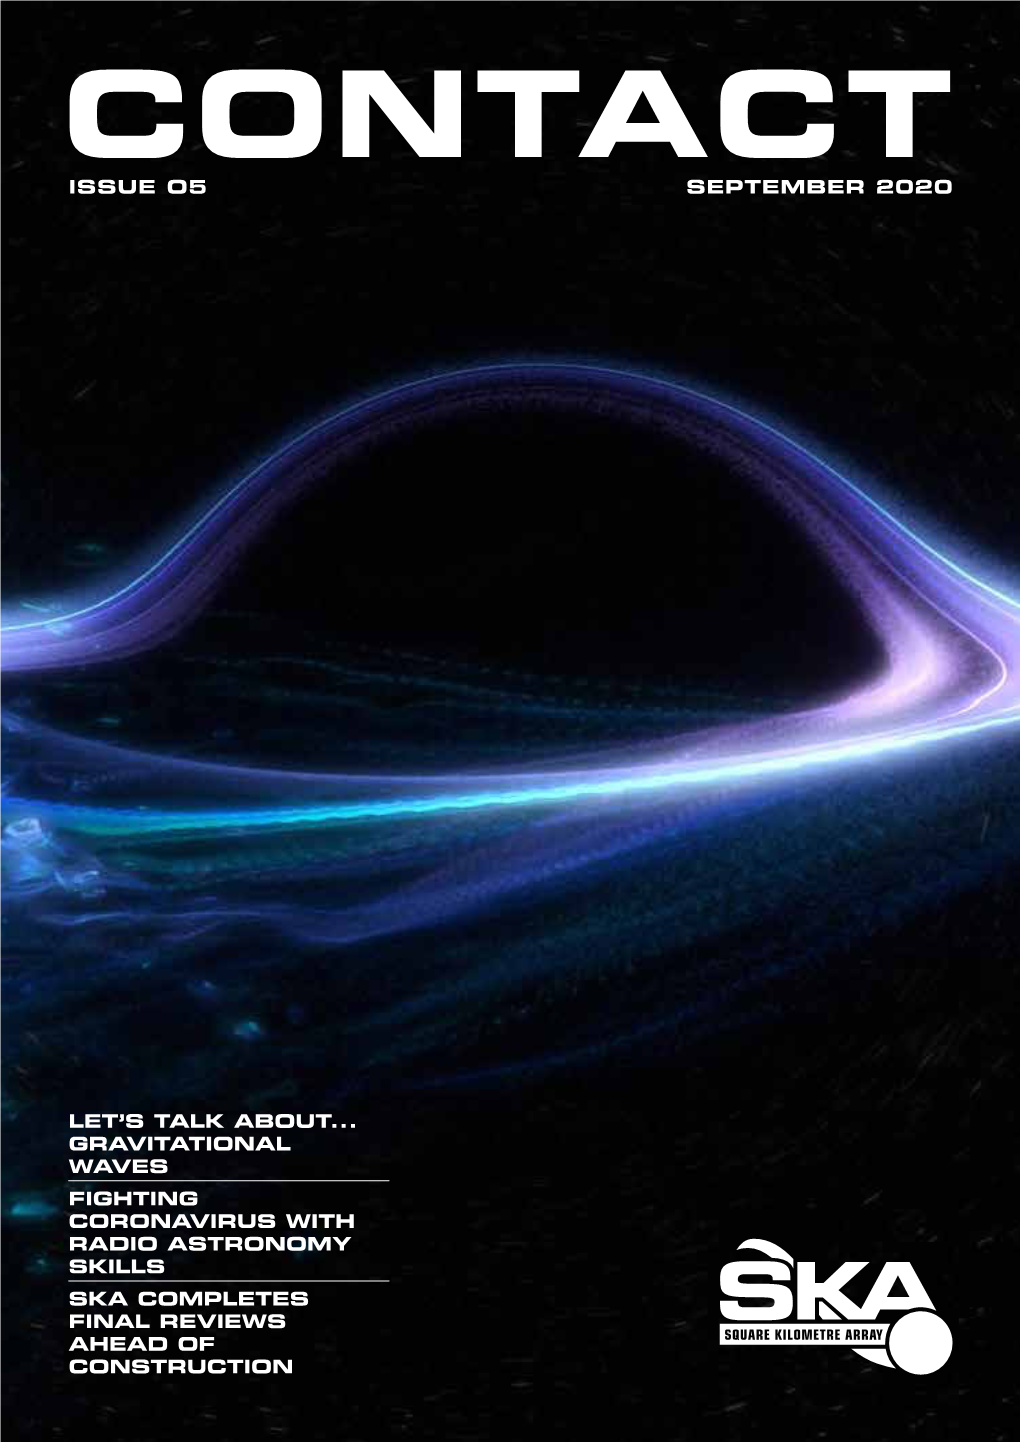 Issue O5 September 2020 Let's Talk About... Gravitational